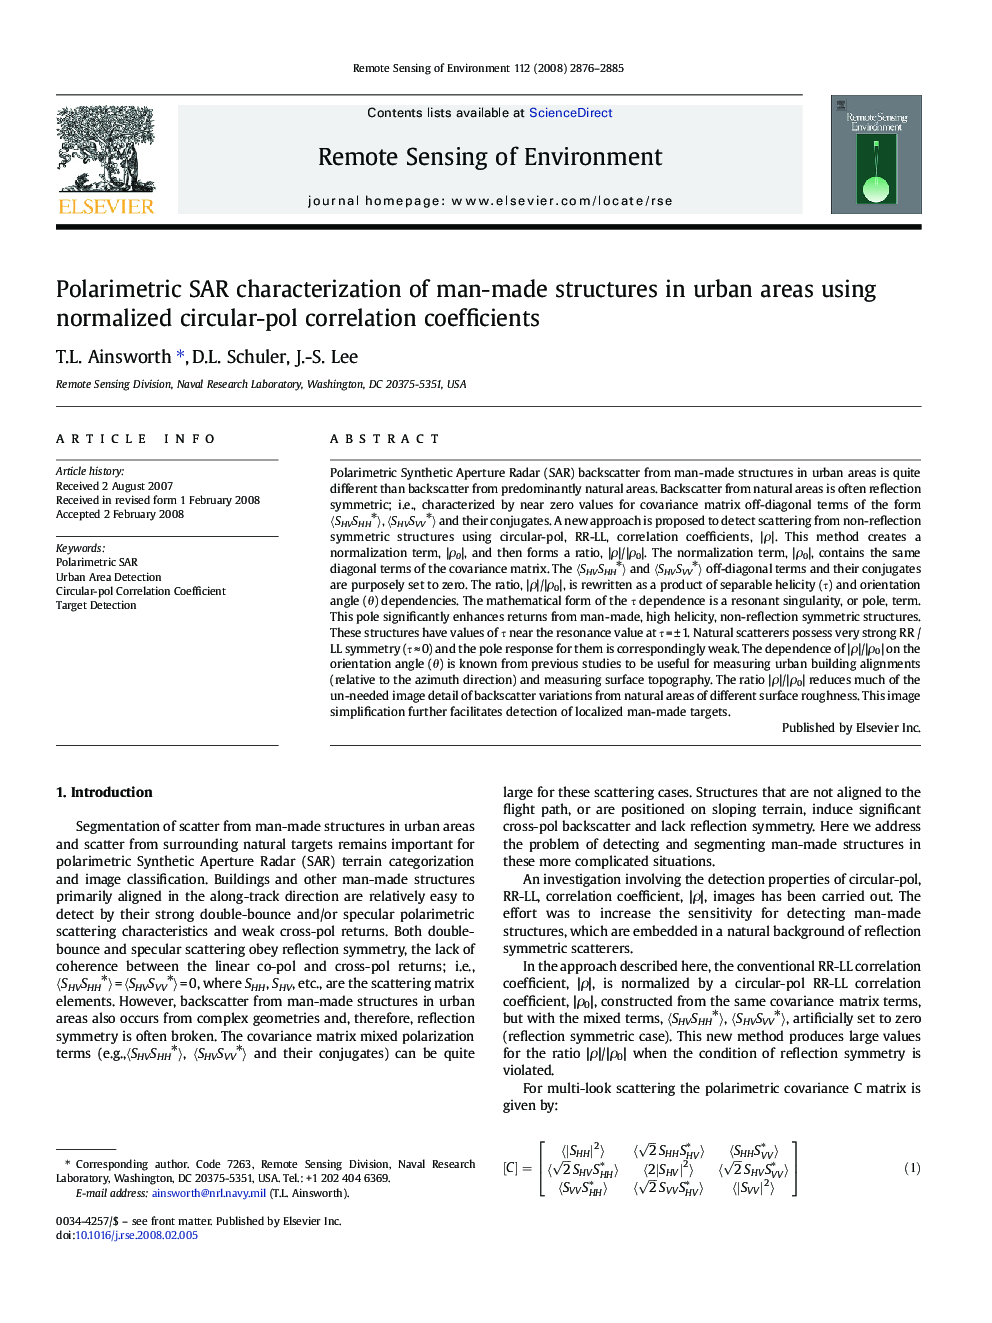 Polarimetric SAR characterization of man-made structures in urban areas using normalized circular-pol correlation coefficients